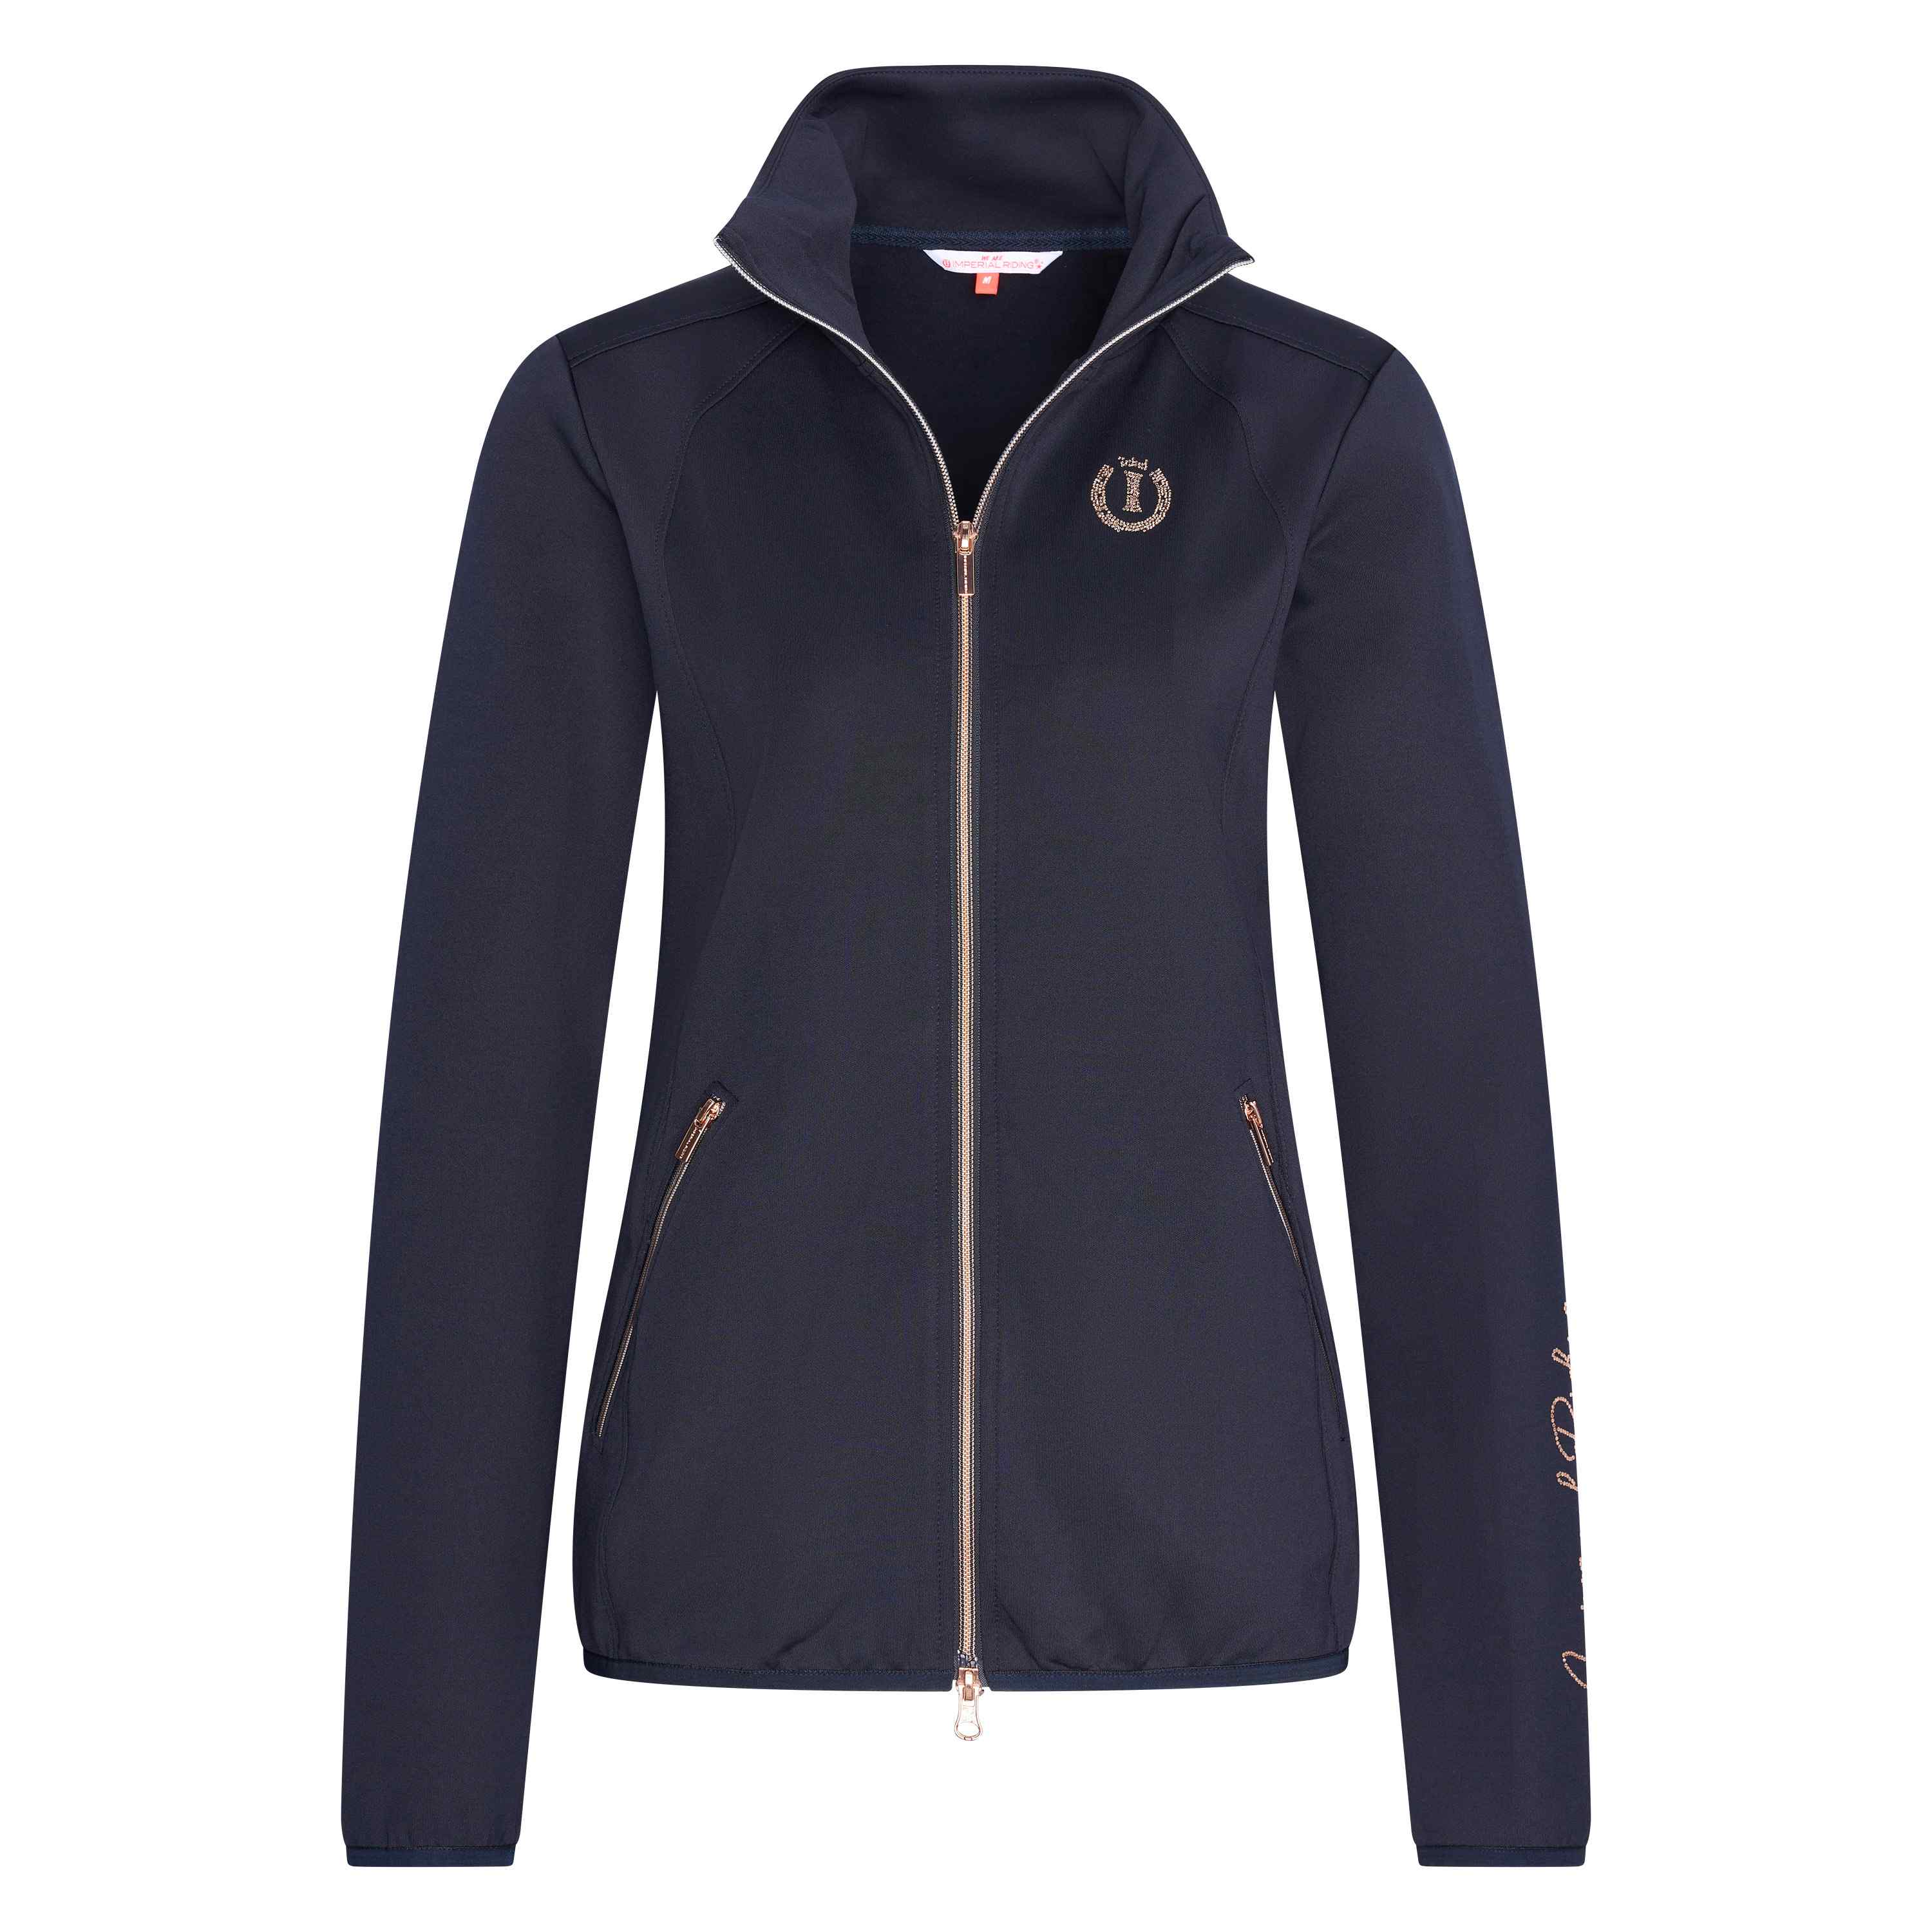 Imperial Riding | Cardigan Sporty Sparks Navy-M